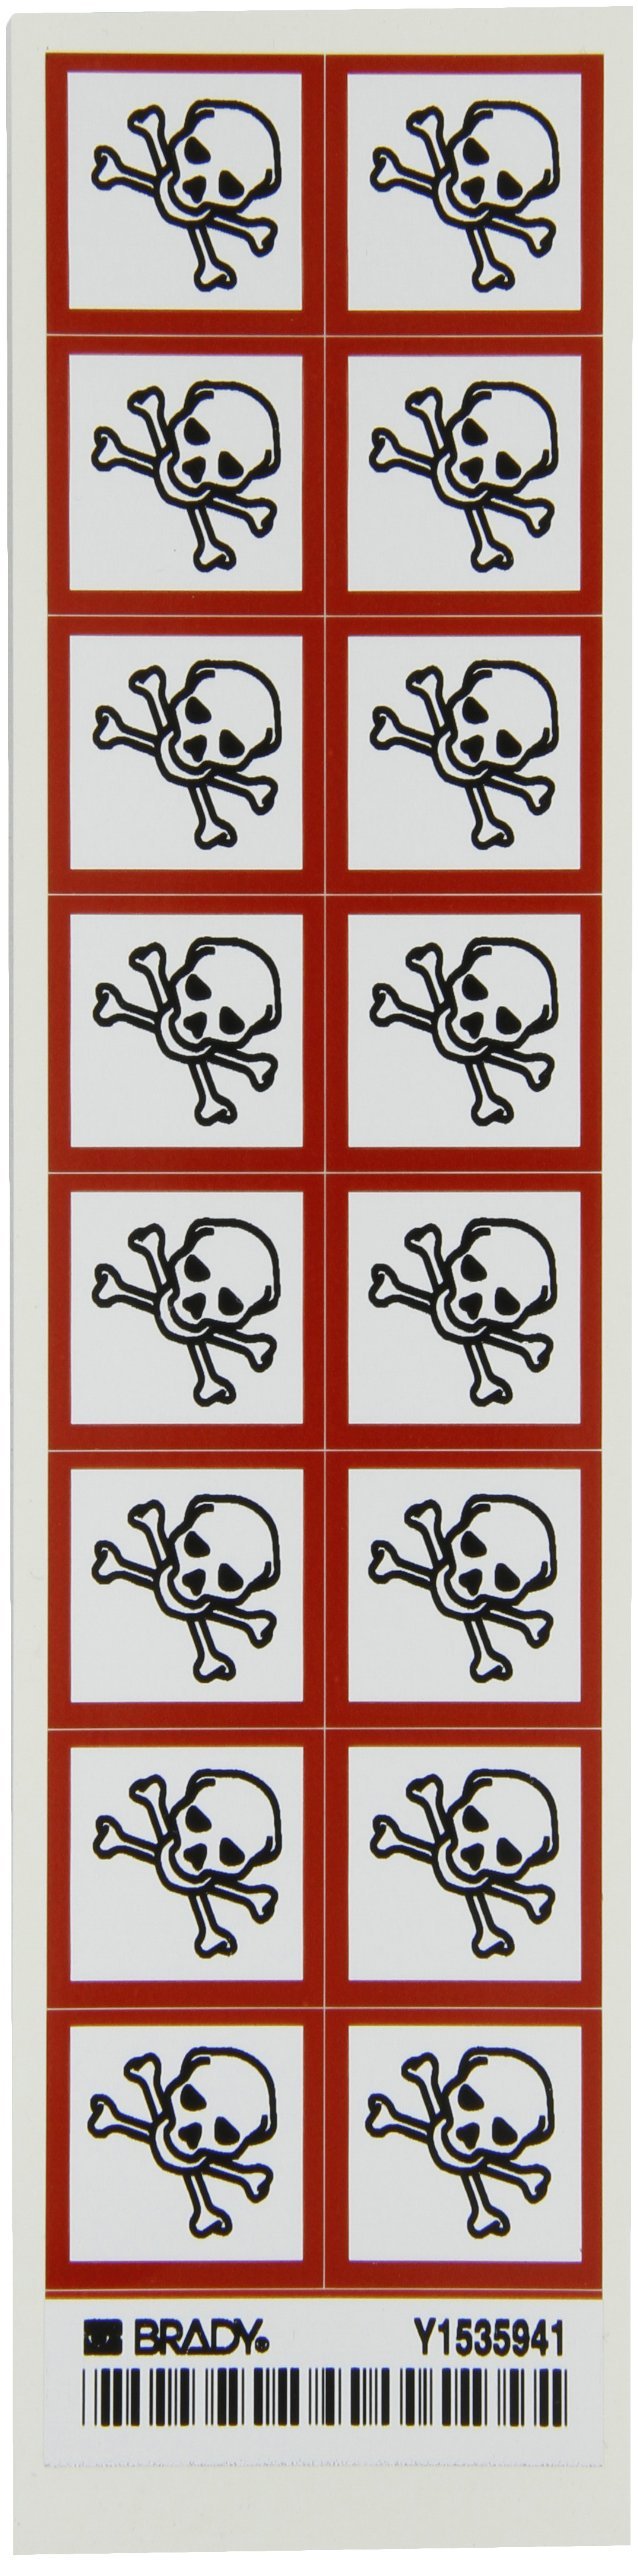 Brady 118846 Vinyl GHS Severe Toxic Picto Labels , Black/Red On White, 1" Height x 1" Width, Pictogram "Severe Toxic" (16 Labels, 1 Card per Package)